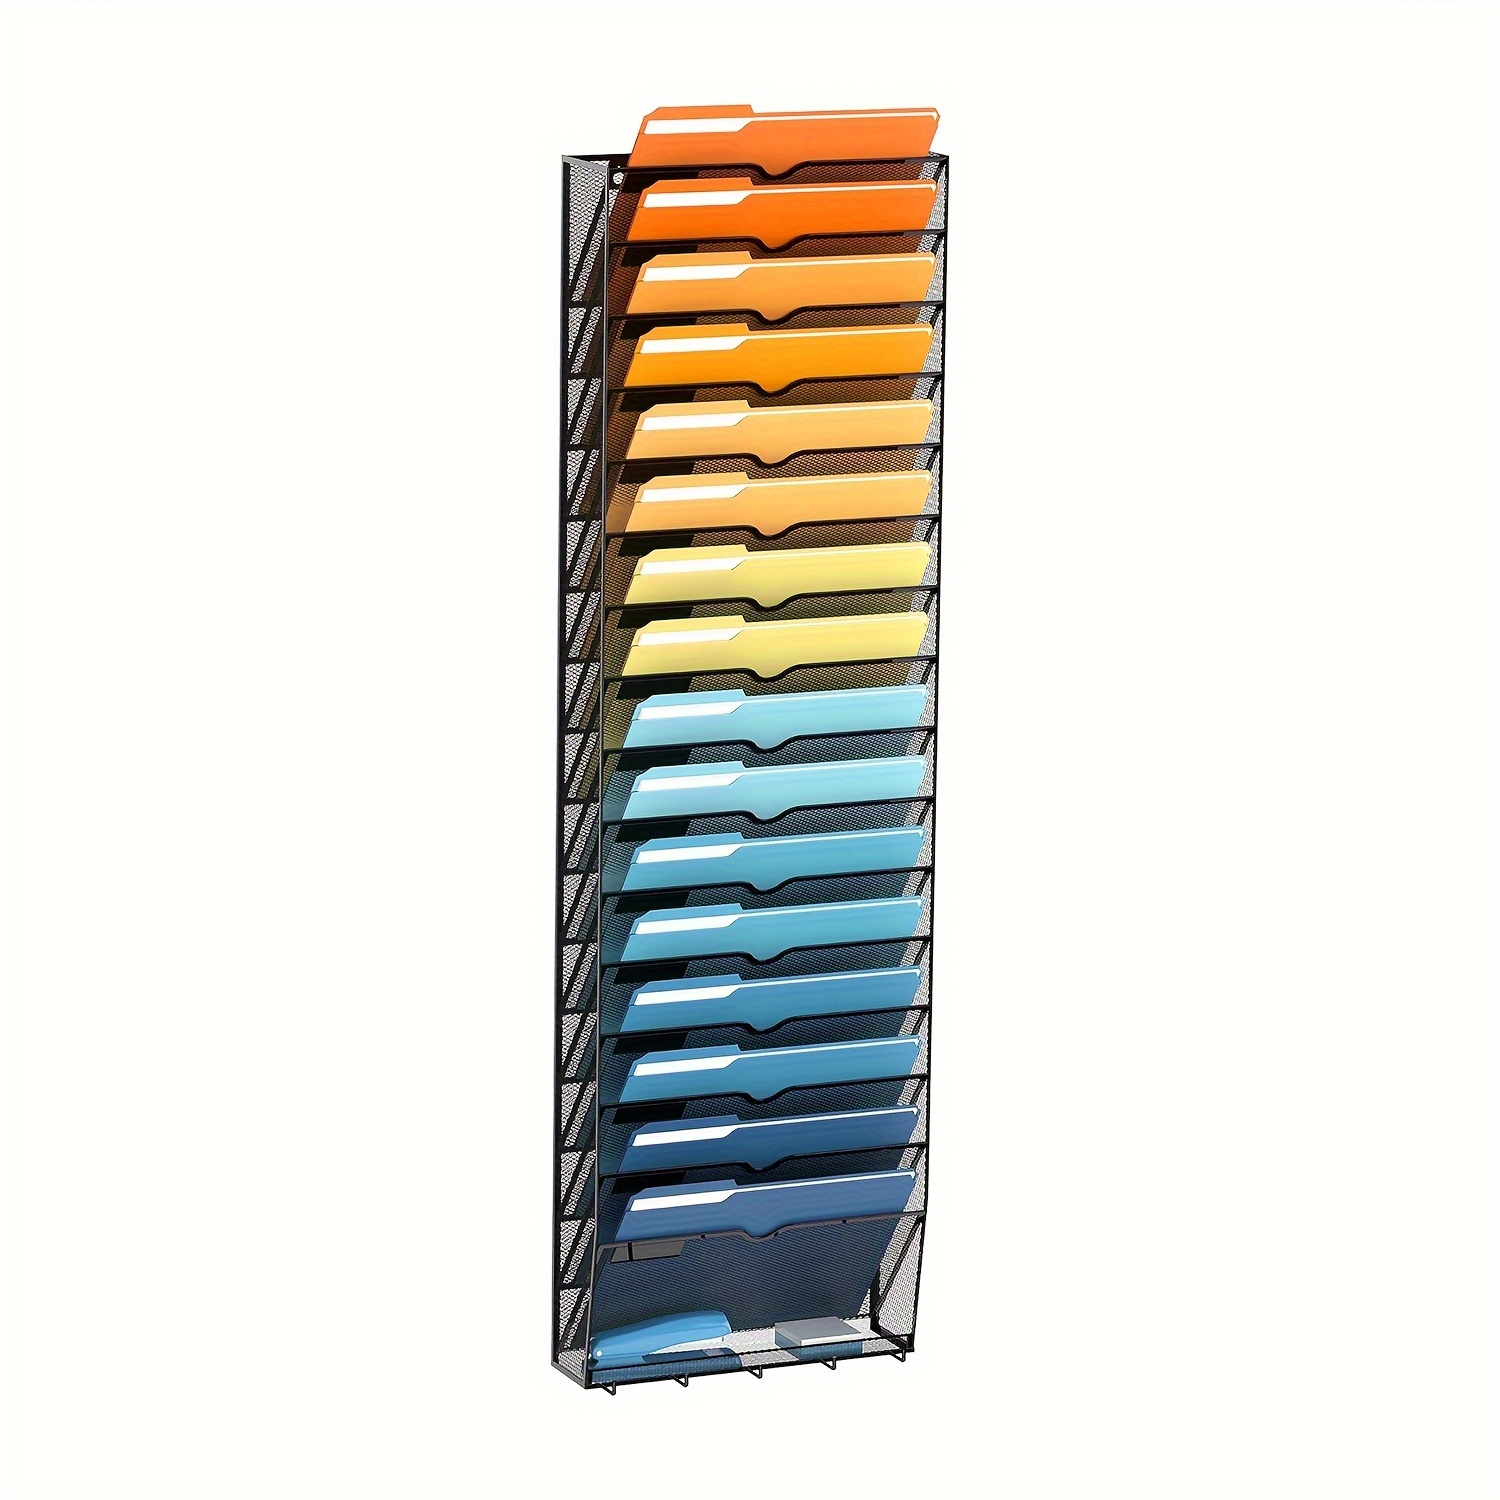 

1pc 17-tier Mesh Wall File Organizer, Hanging Wall File Holder, Office Organization For Mails, Folders, Papers, Files Clipboard Magazine Rack